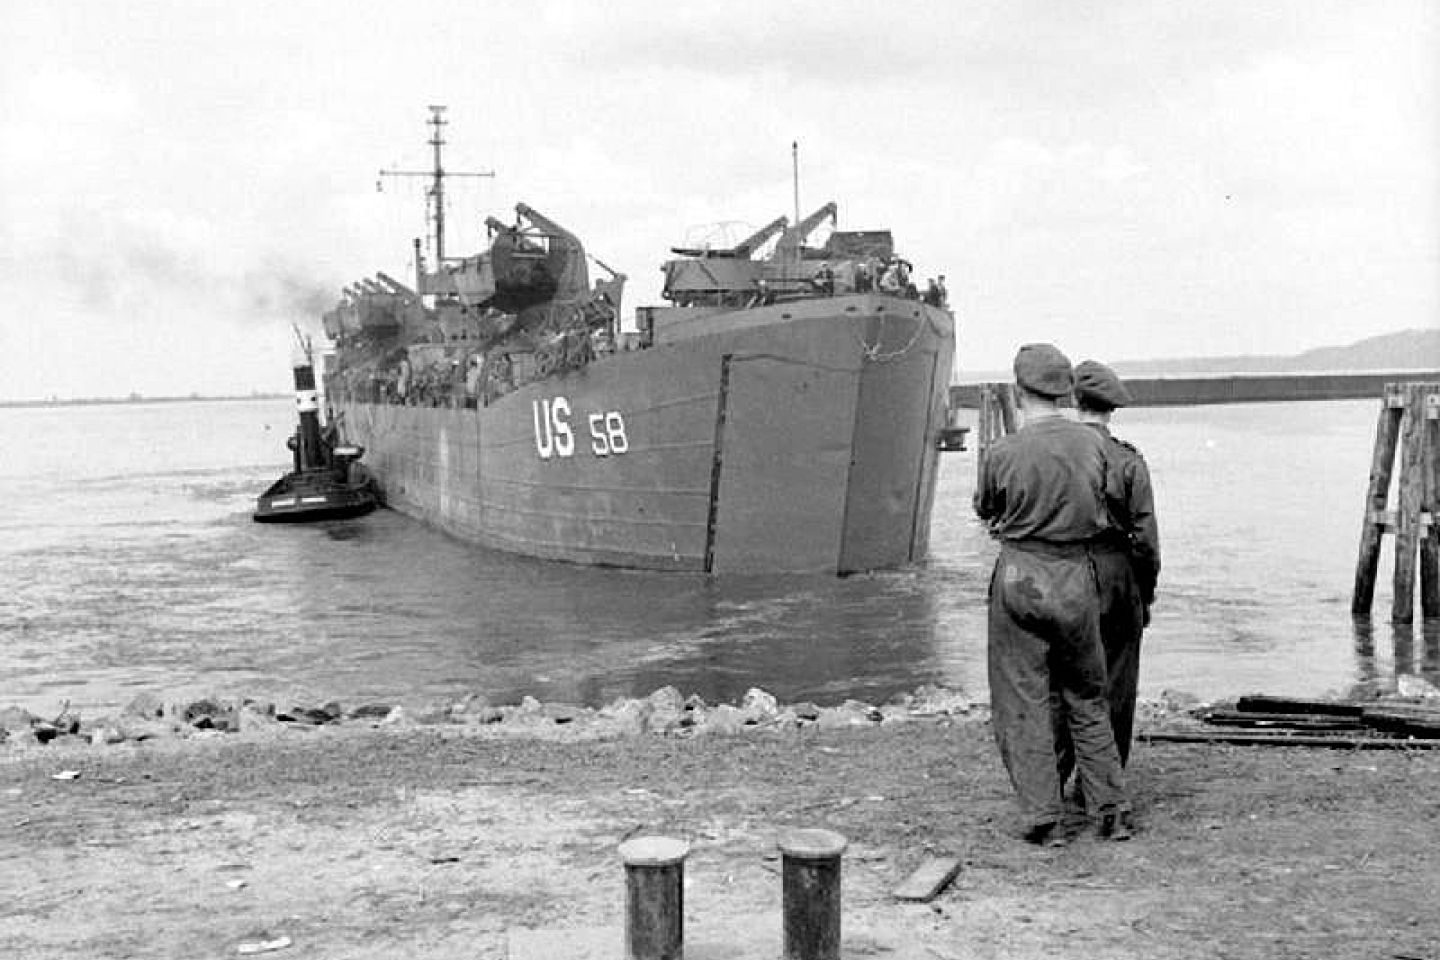 USS LST-58 retracts from the hards in the port of Hamburg.